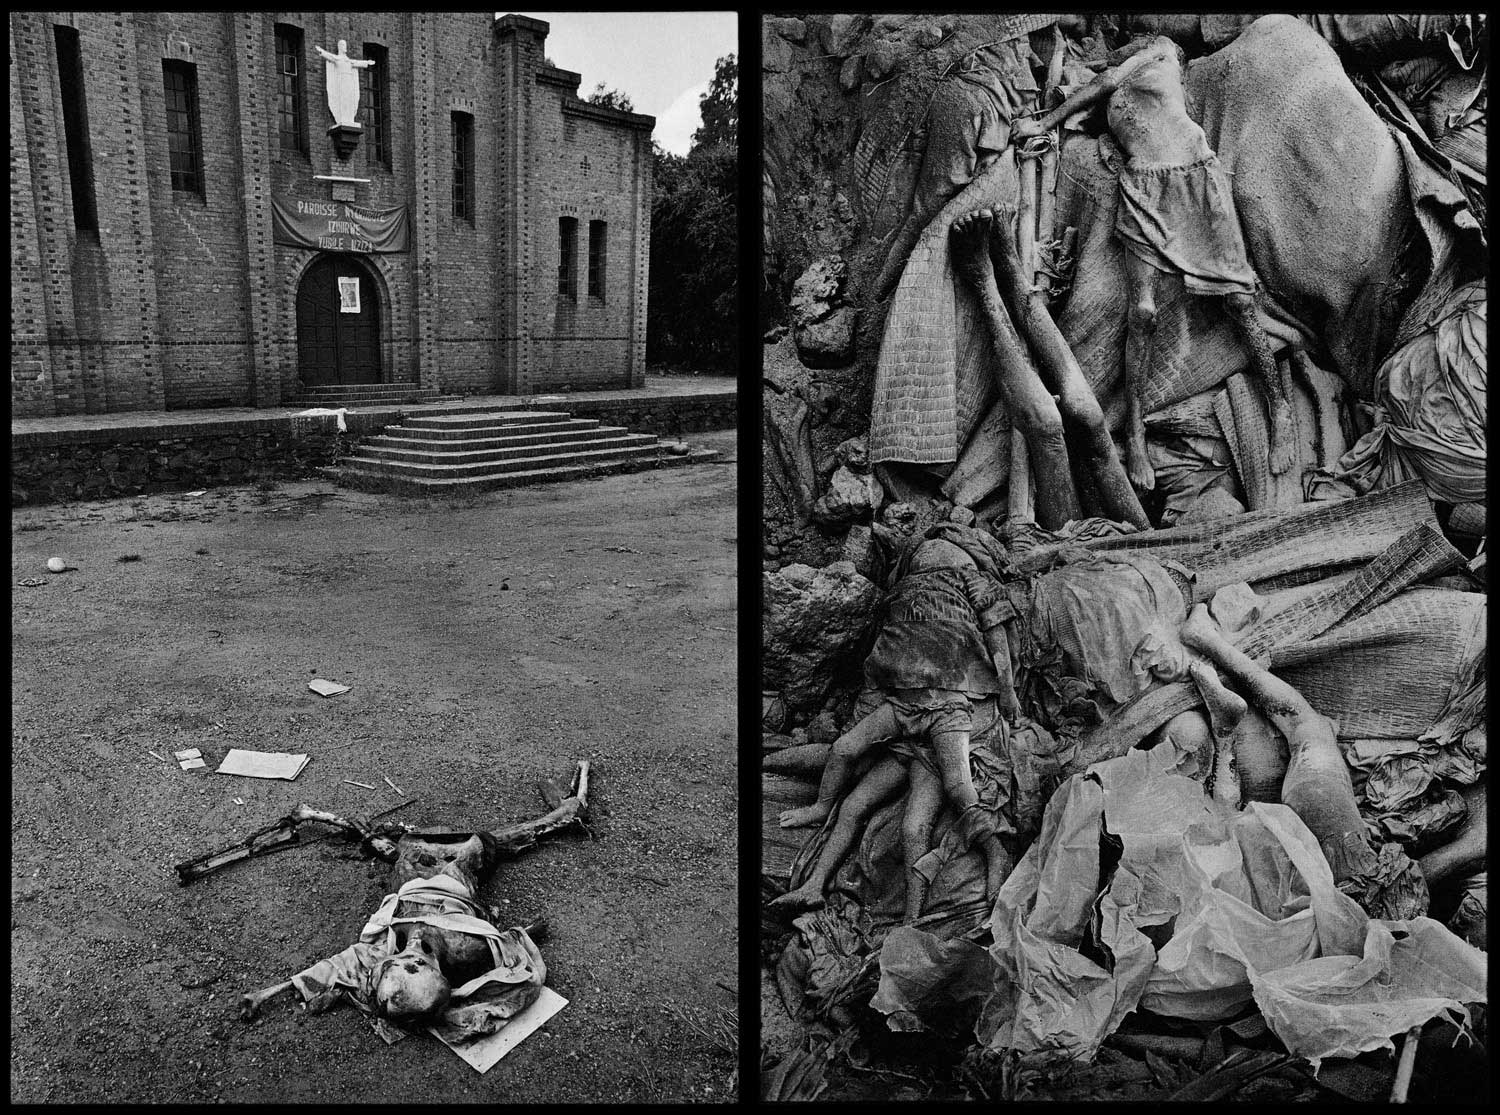 The massacre at Nyarabuye took place in the grounds of a Catholic Church and school. Hundreds of Tutsis, including many children, were slaughtered at close range in Rwanda, 1994 (left). Thousands were buried anonymously in mass, communal graves in Zaire, 1994 (right).